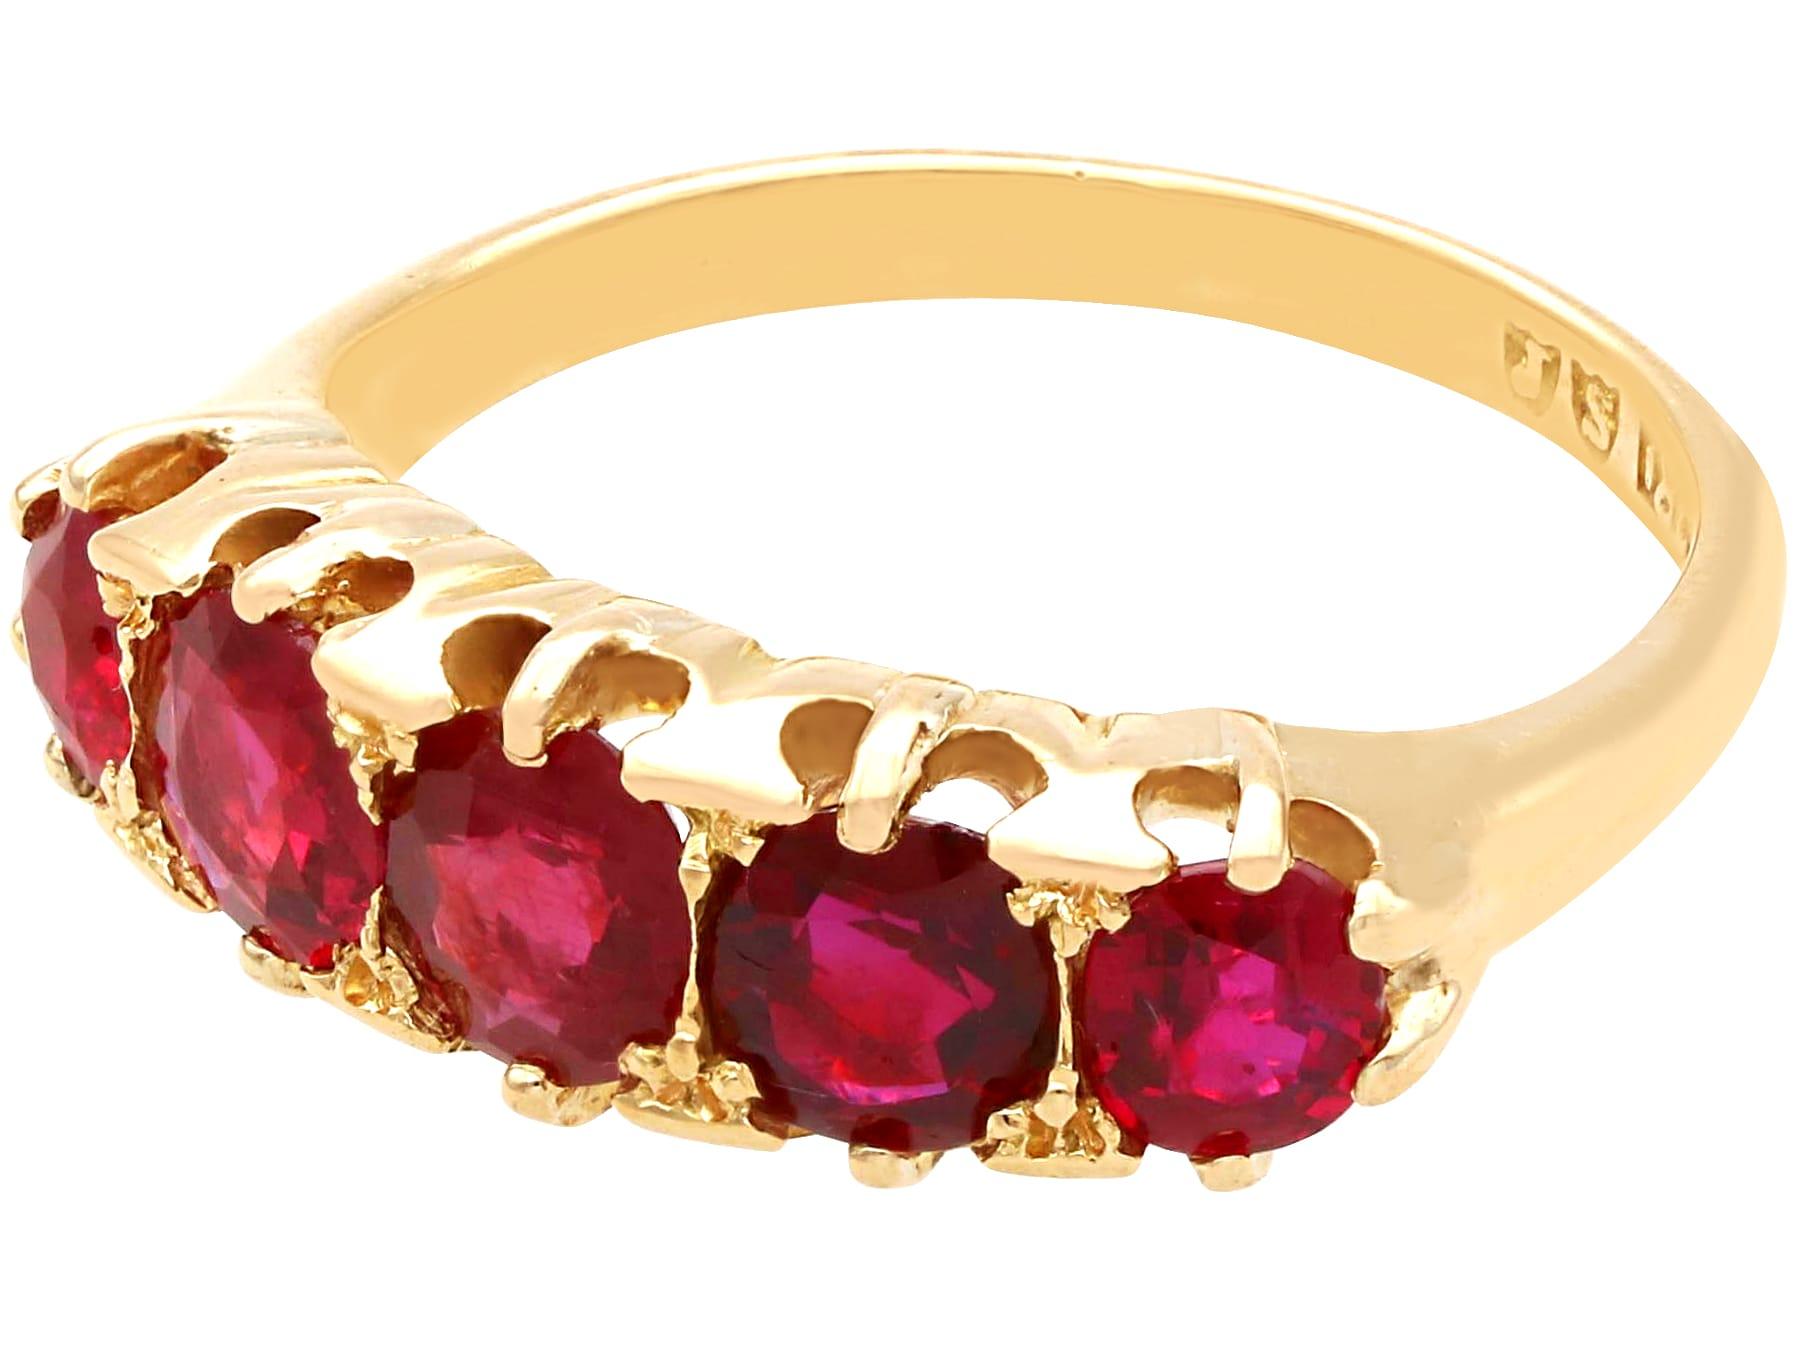 Antique 2.20Ct Ruby and 18k Yellow Gold Five Stone Ring Circa 1900 For Sale 1